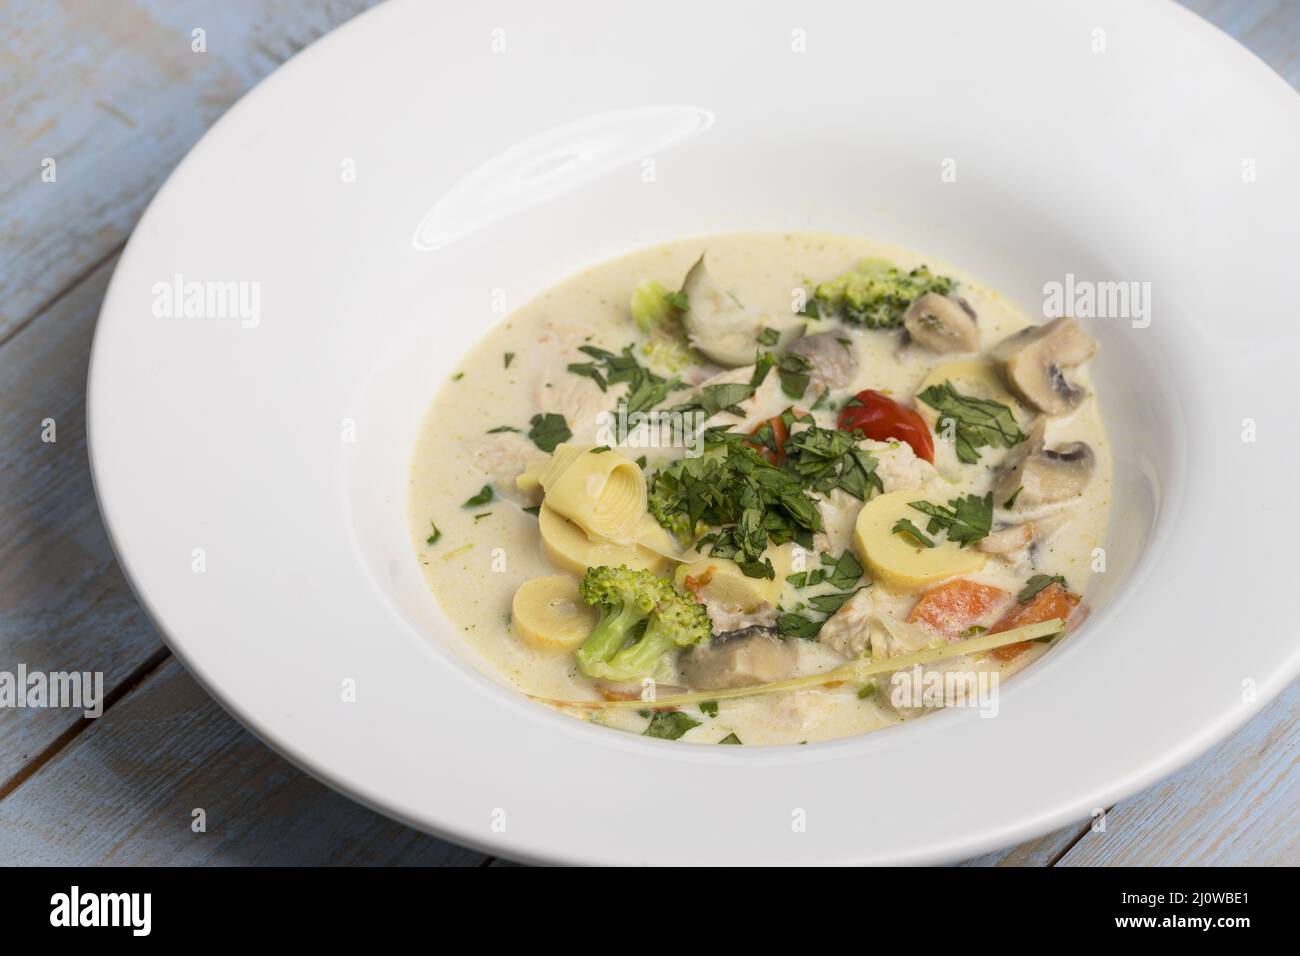 Thailand coconut soup on wood Stock Photo